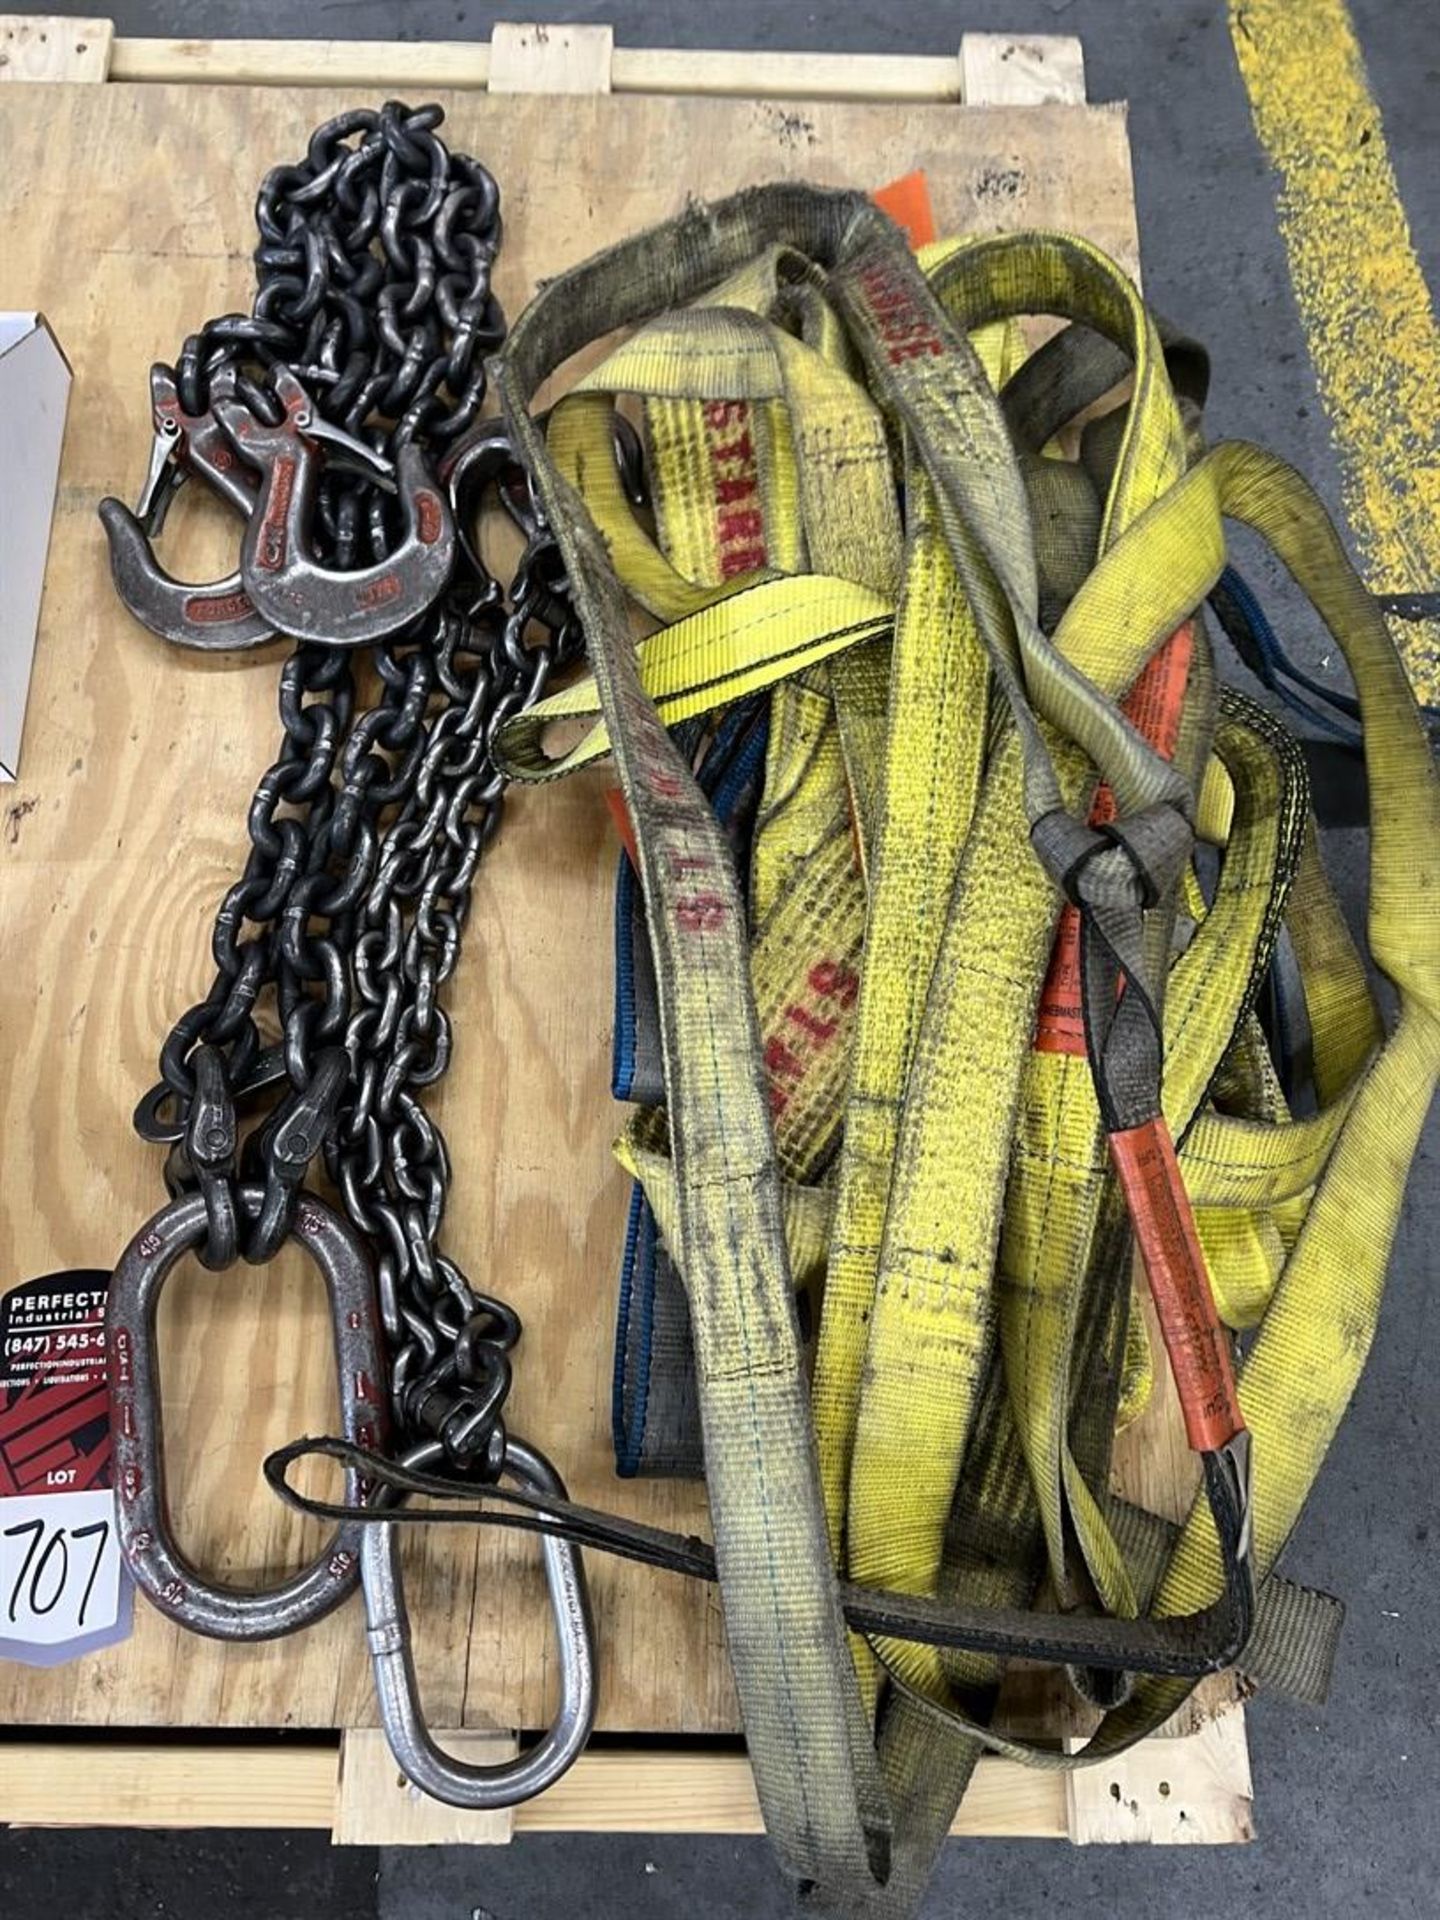 Pallet of Hoist Rings, Eye-Bolts, Nylon Slings and Lifting Chain - Image 3 of 3